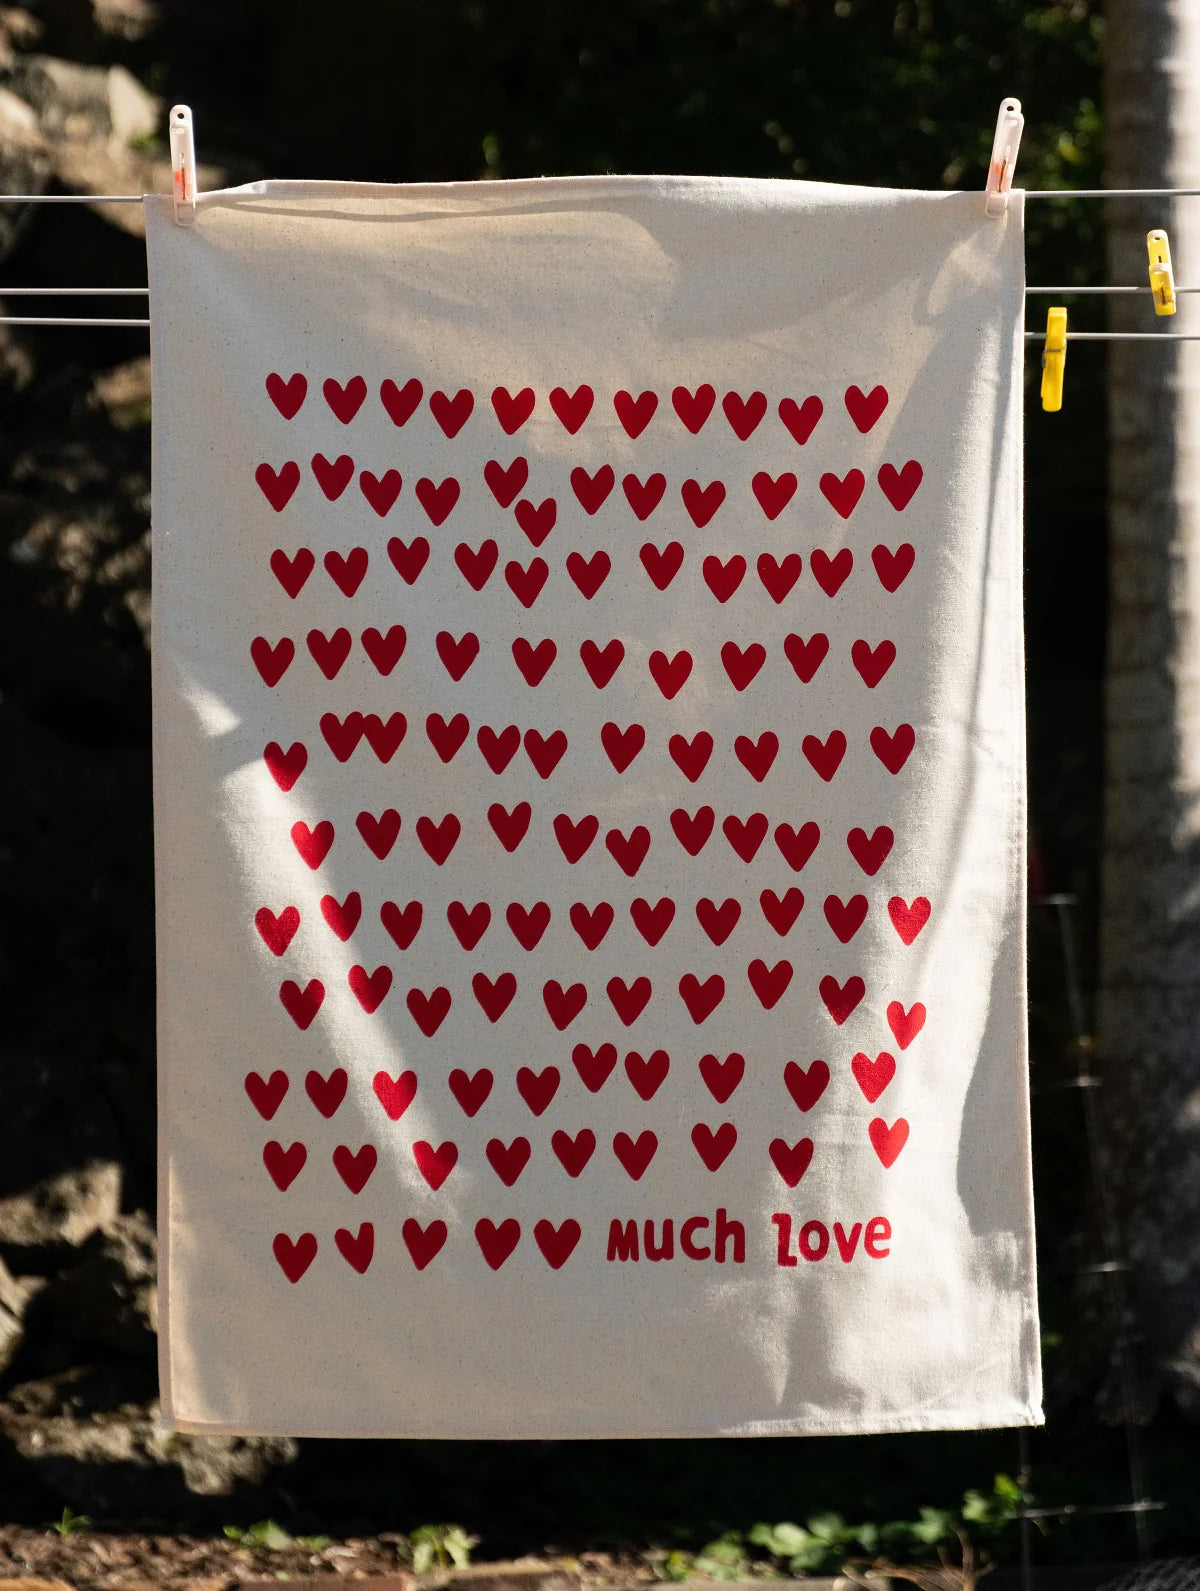 A Much Love Tea Towel adorned with multiple red hearts in a grid pattern and the words "much love" at the bottom, hanging on a clothesline outdoors by Tuesday Print.